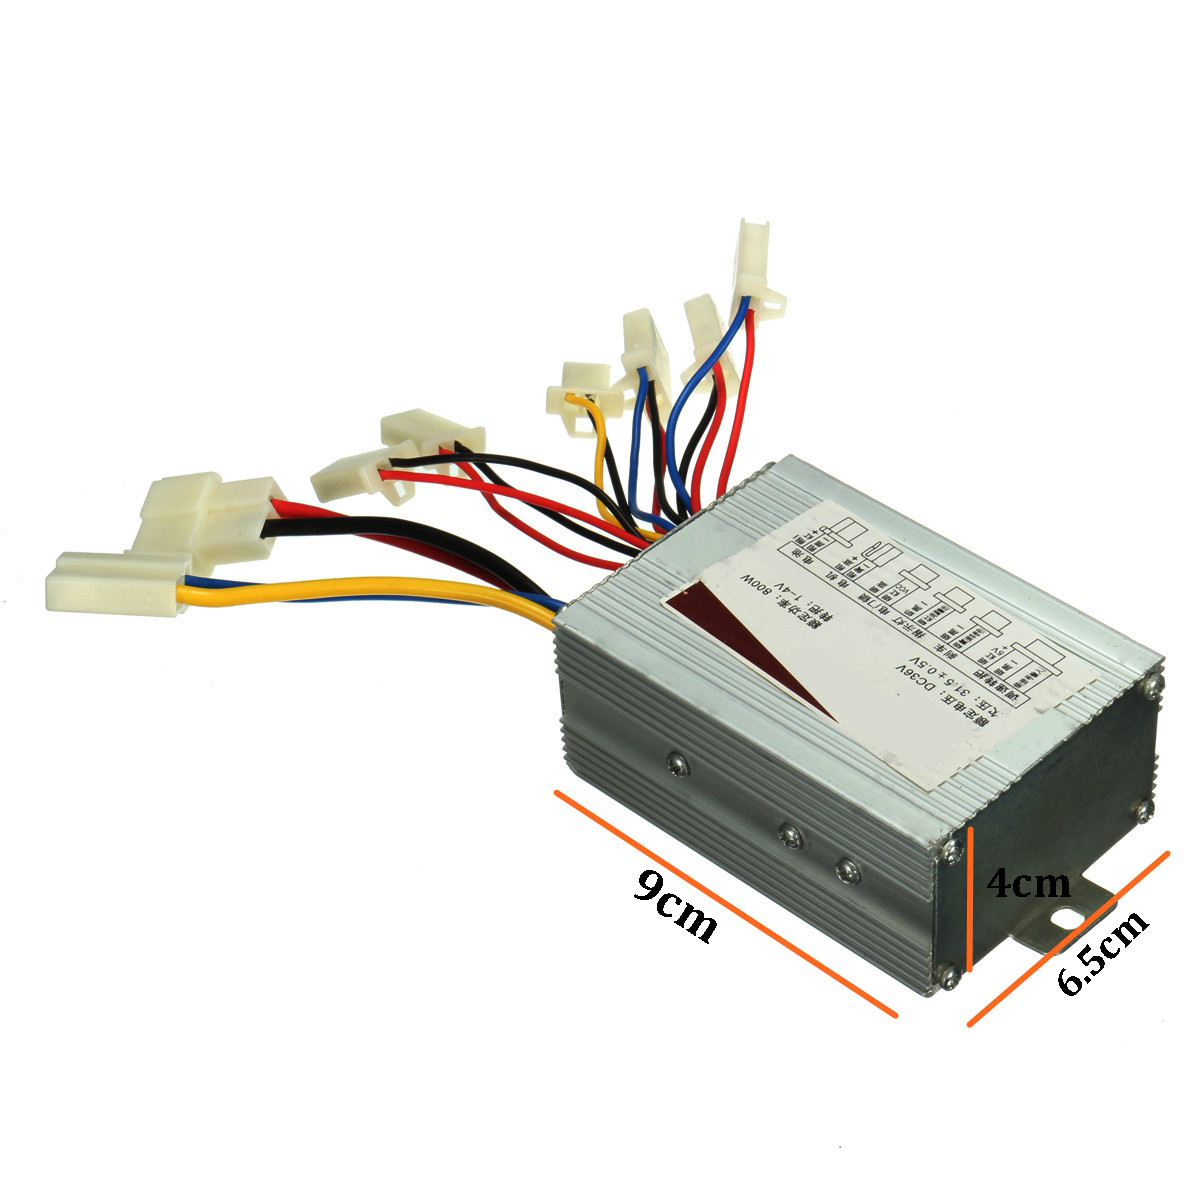 36V 800W DC Brush Motor Speed Controller for Electric Scooter Bicycle E-bike Motorcycle Accessories Parts